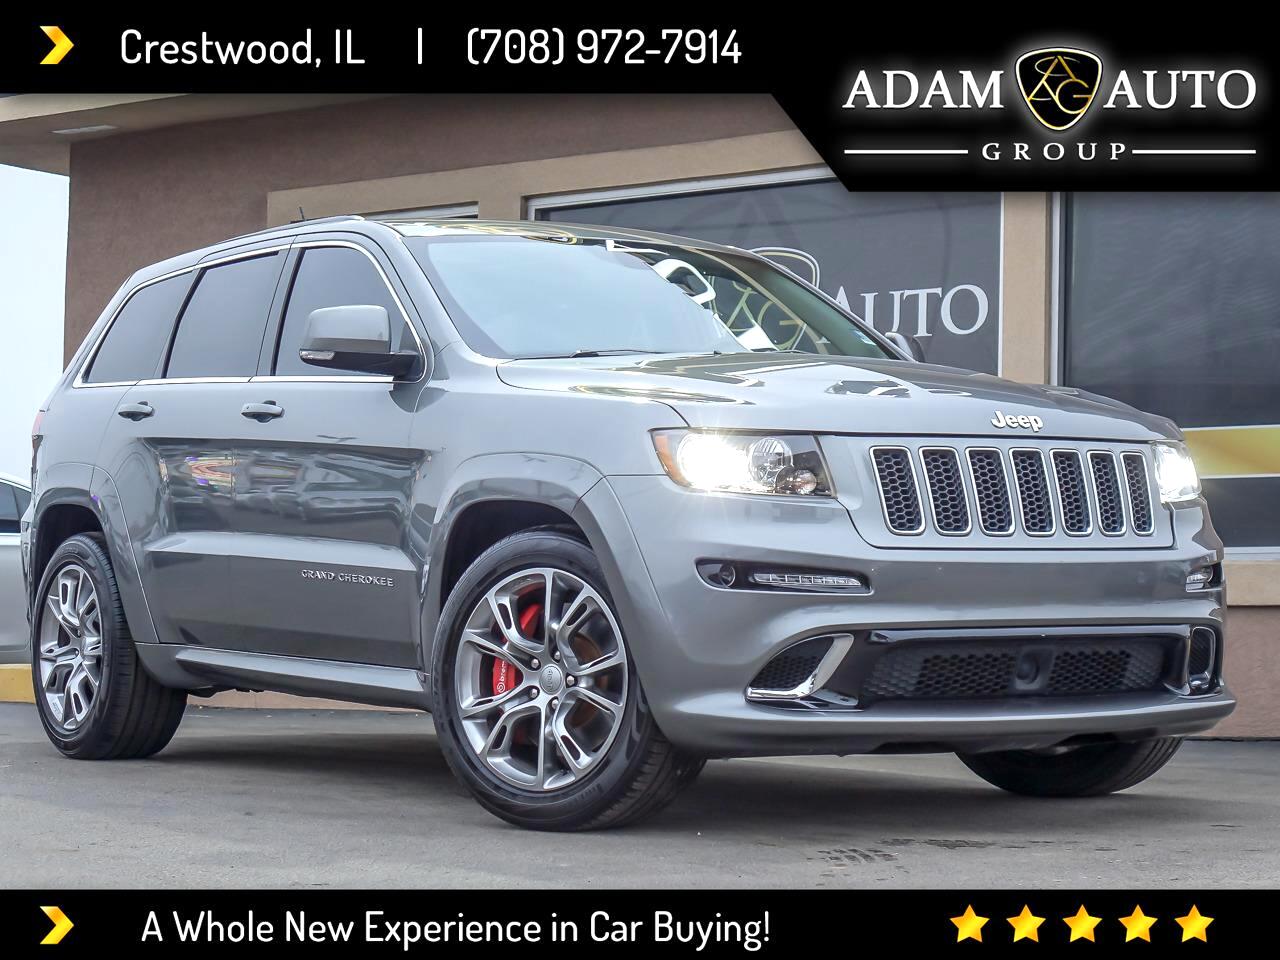 Used 2012 Jeep Grand Cherokee Srt8 4wd For Sale In Crestwood